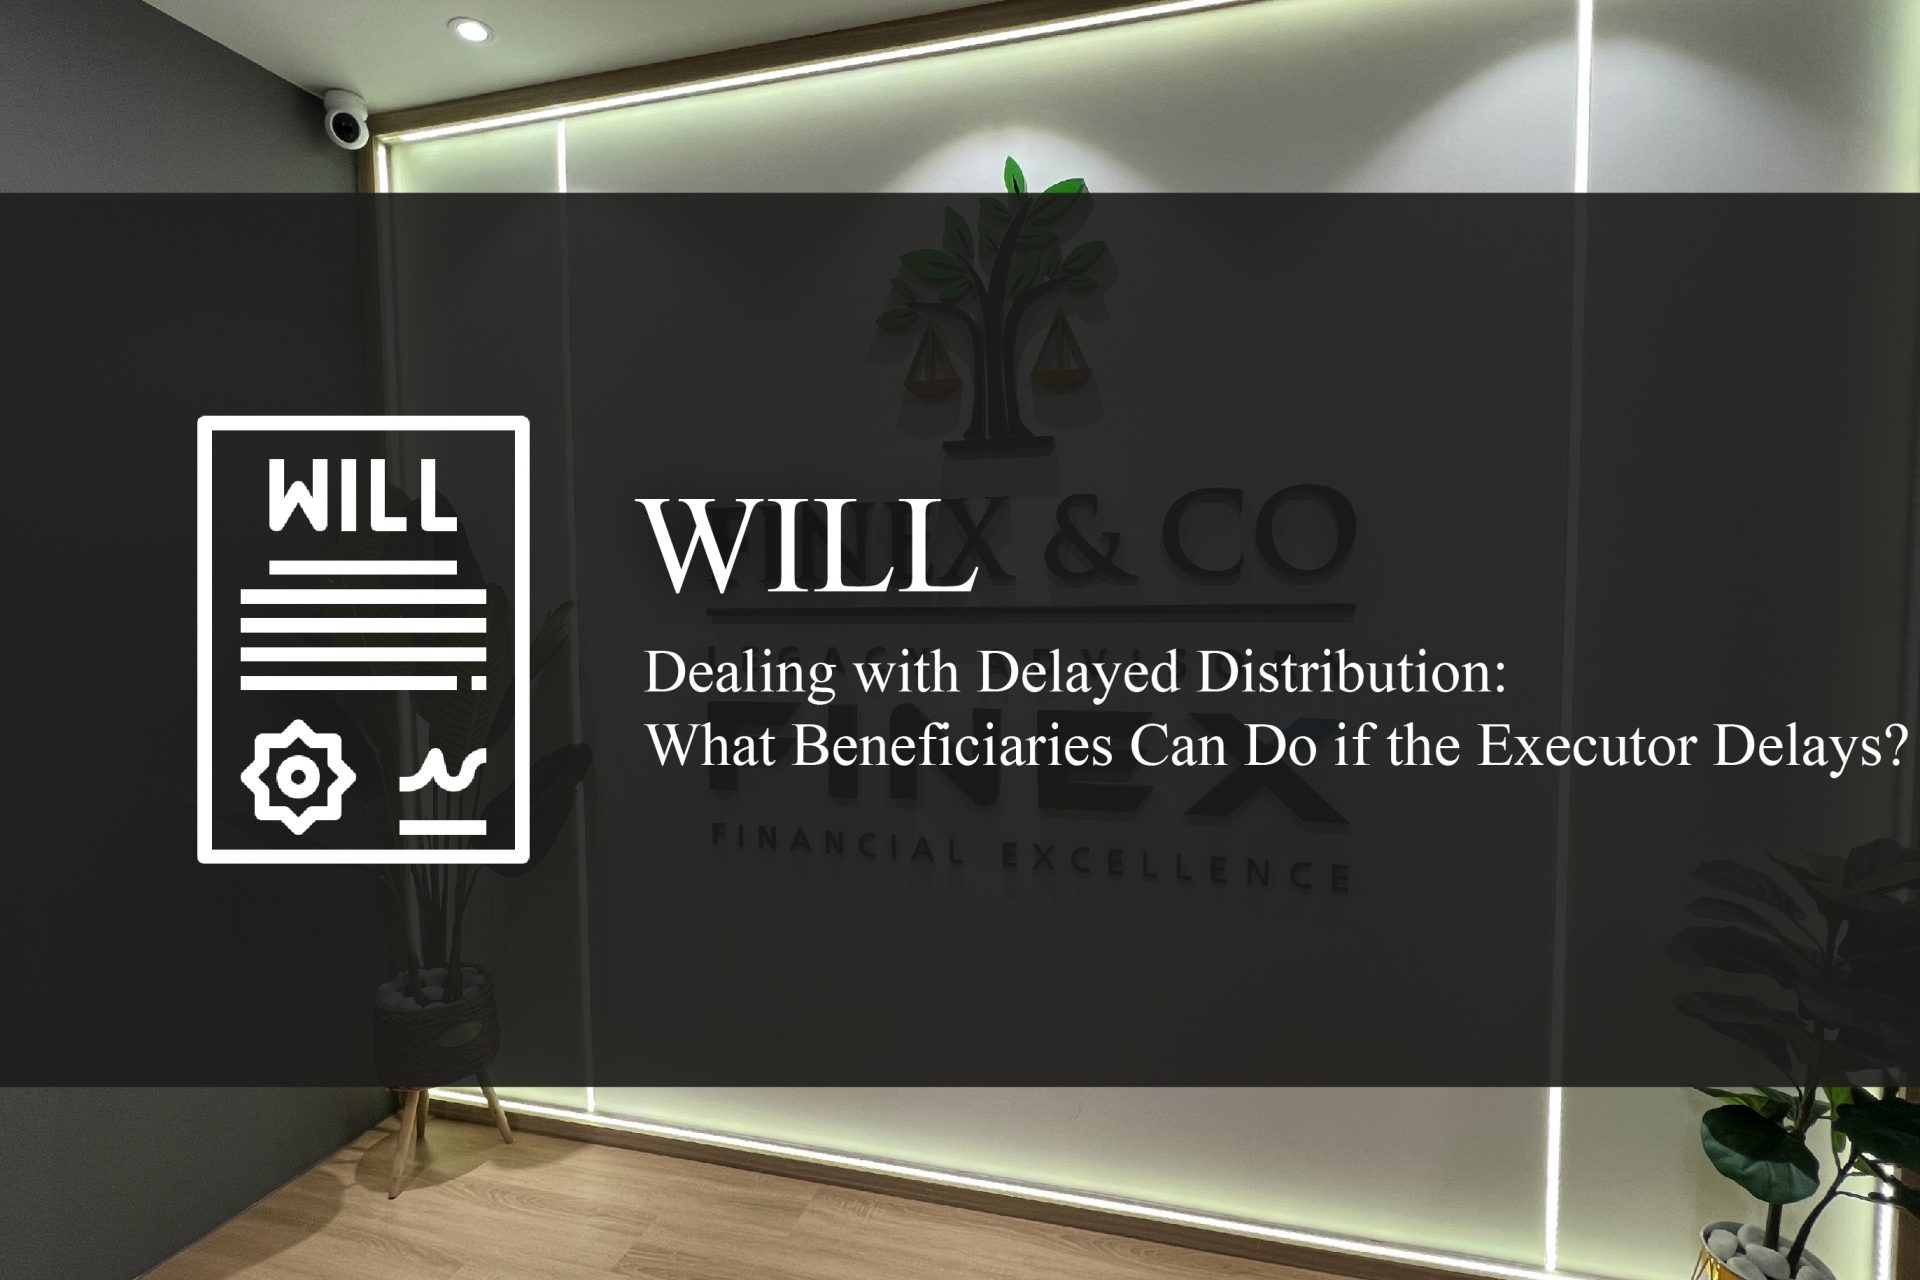 Dealing with Delayed Distribution: What Beneficiaries Can Do if the Executor Delays?